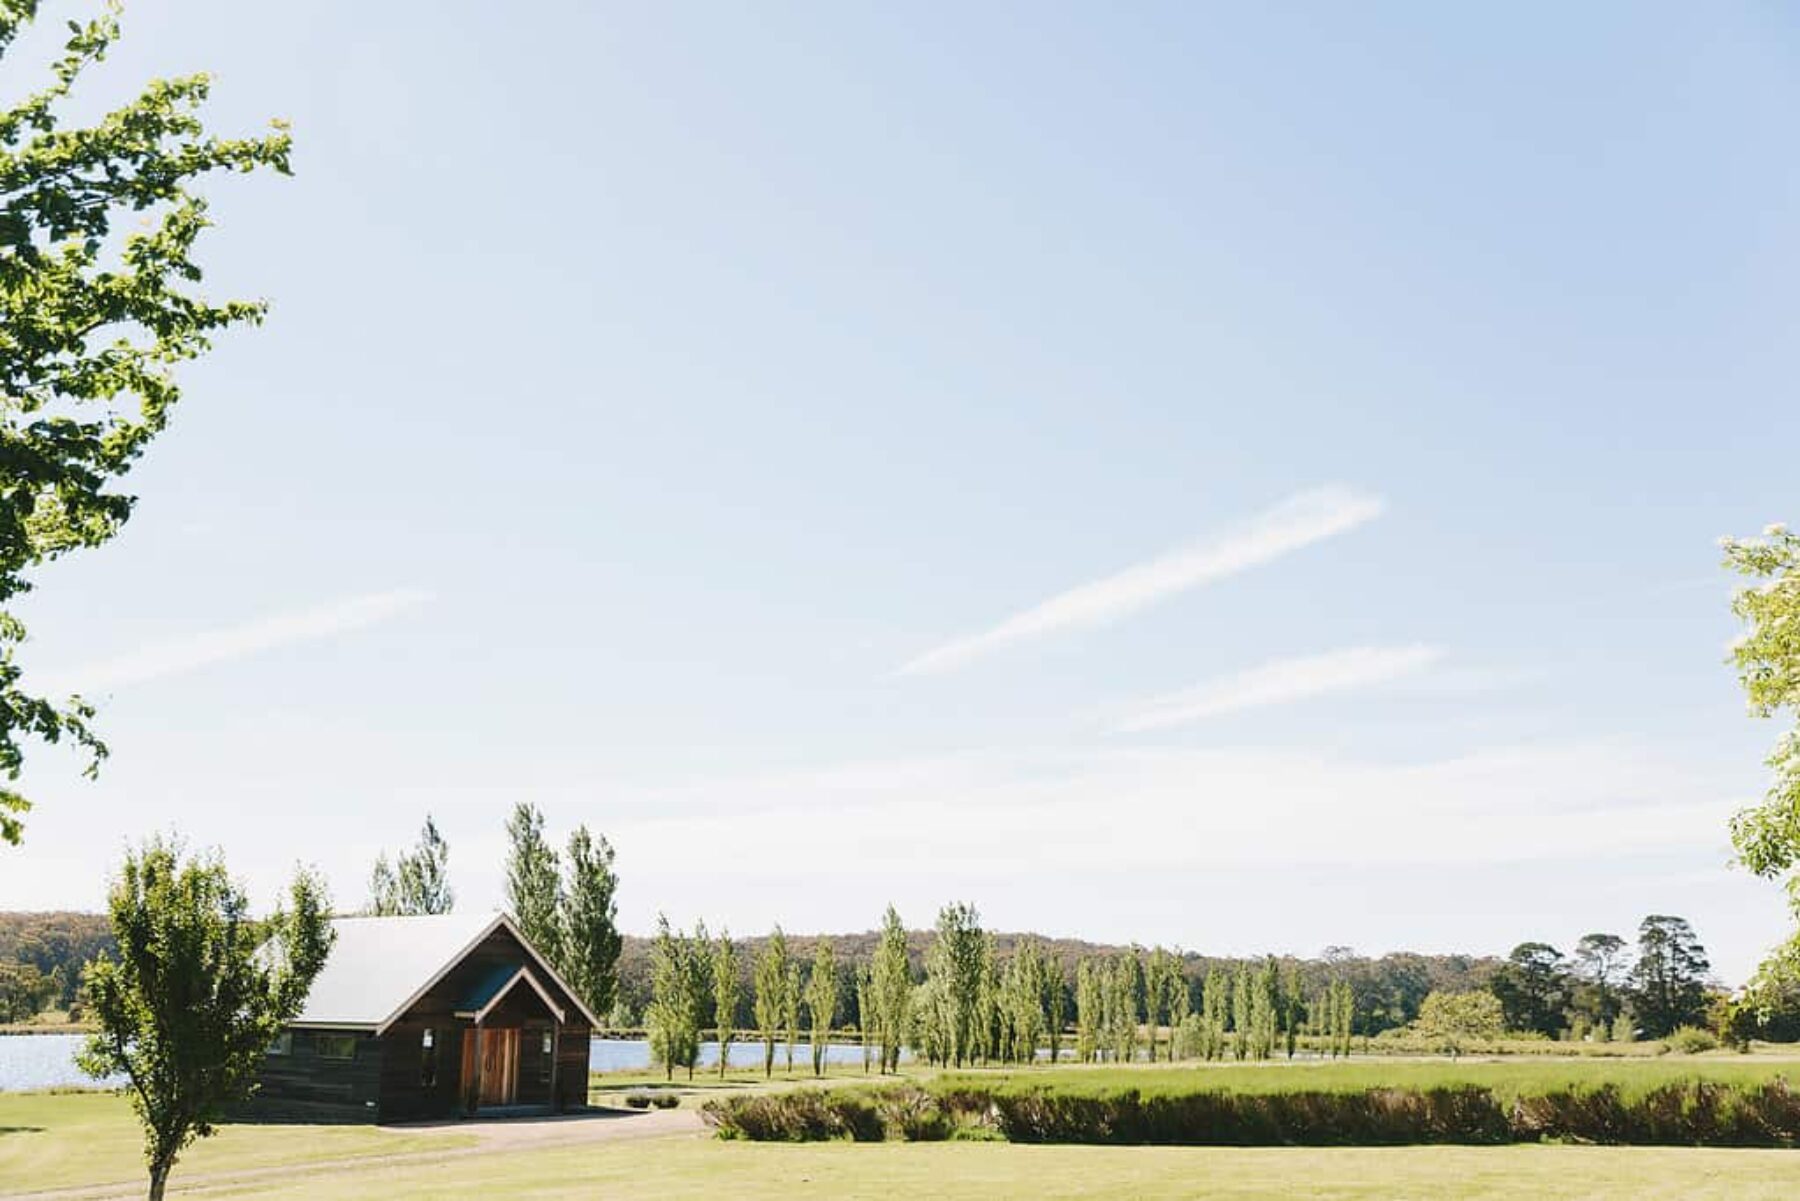 Sault Daylesford wedding - photography by Jonathan Ong